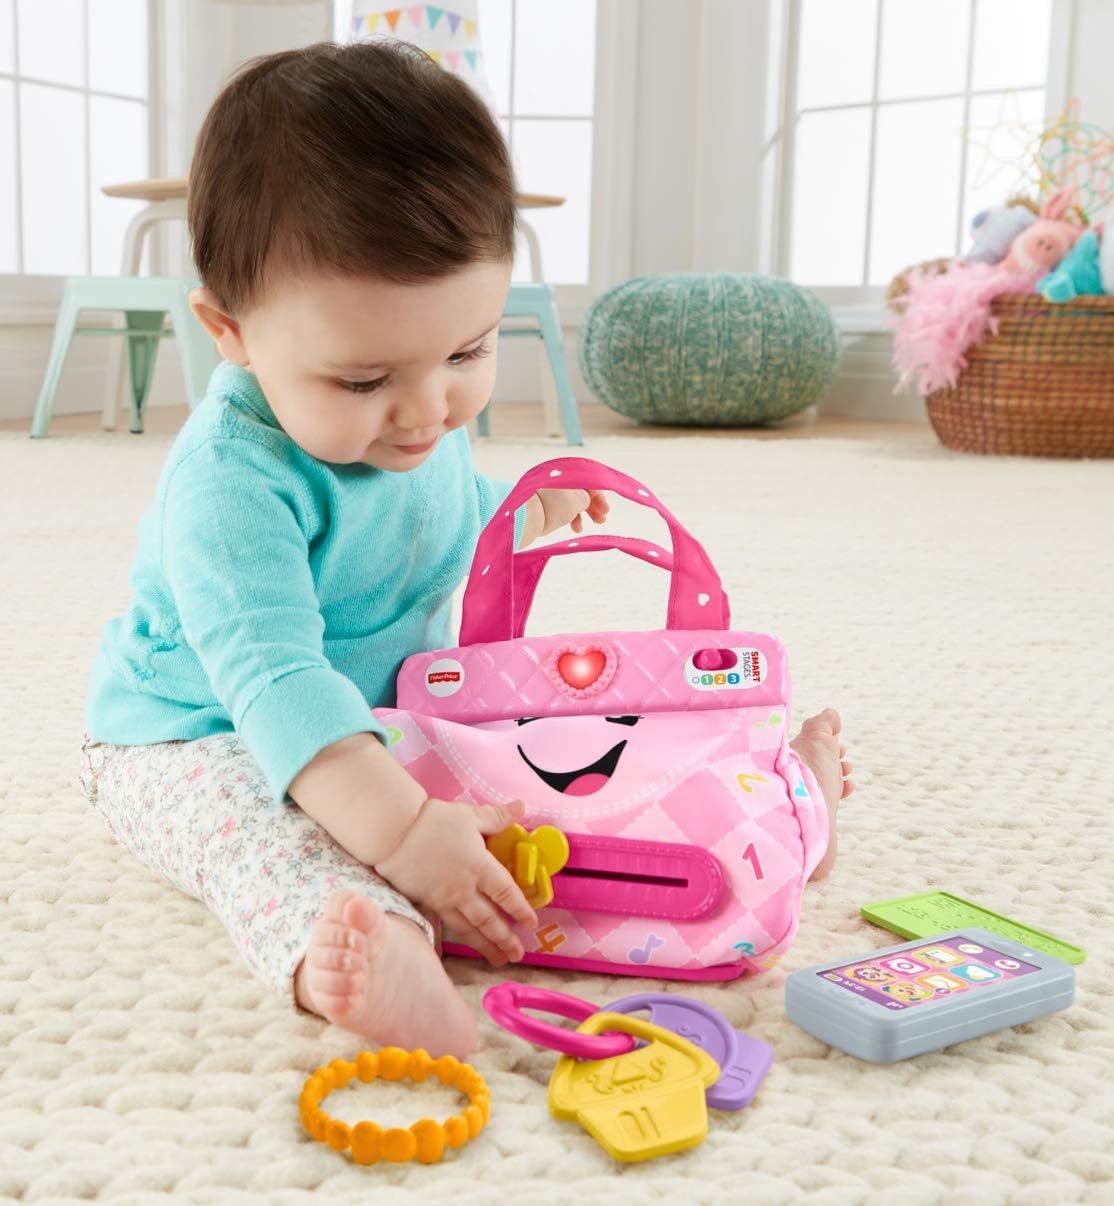 Fisher-Price Laugh & Learn My Smart Purse, Pink - Learning Toy